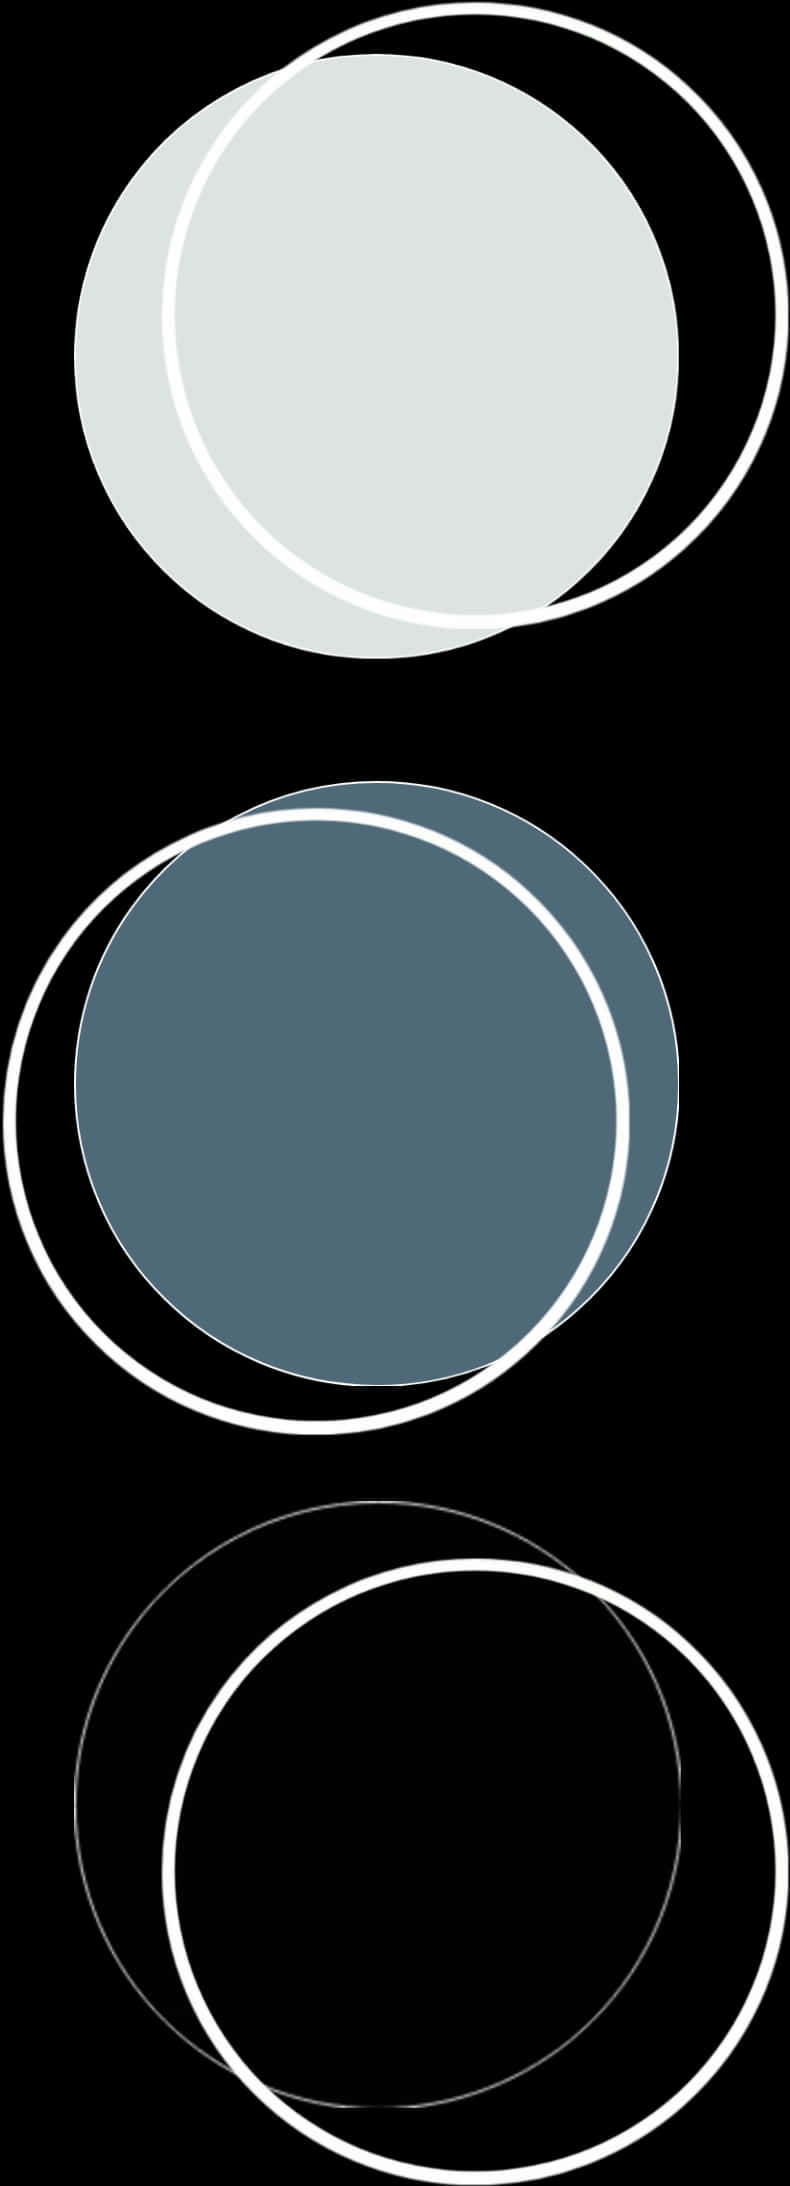 A Blue Circle With White Lines